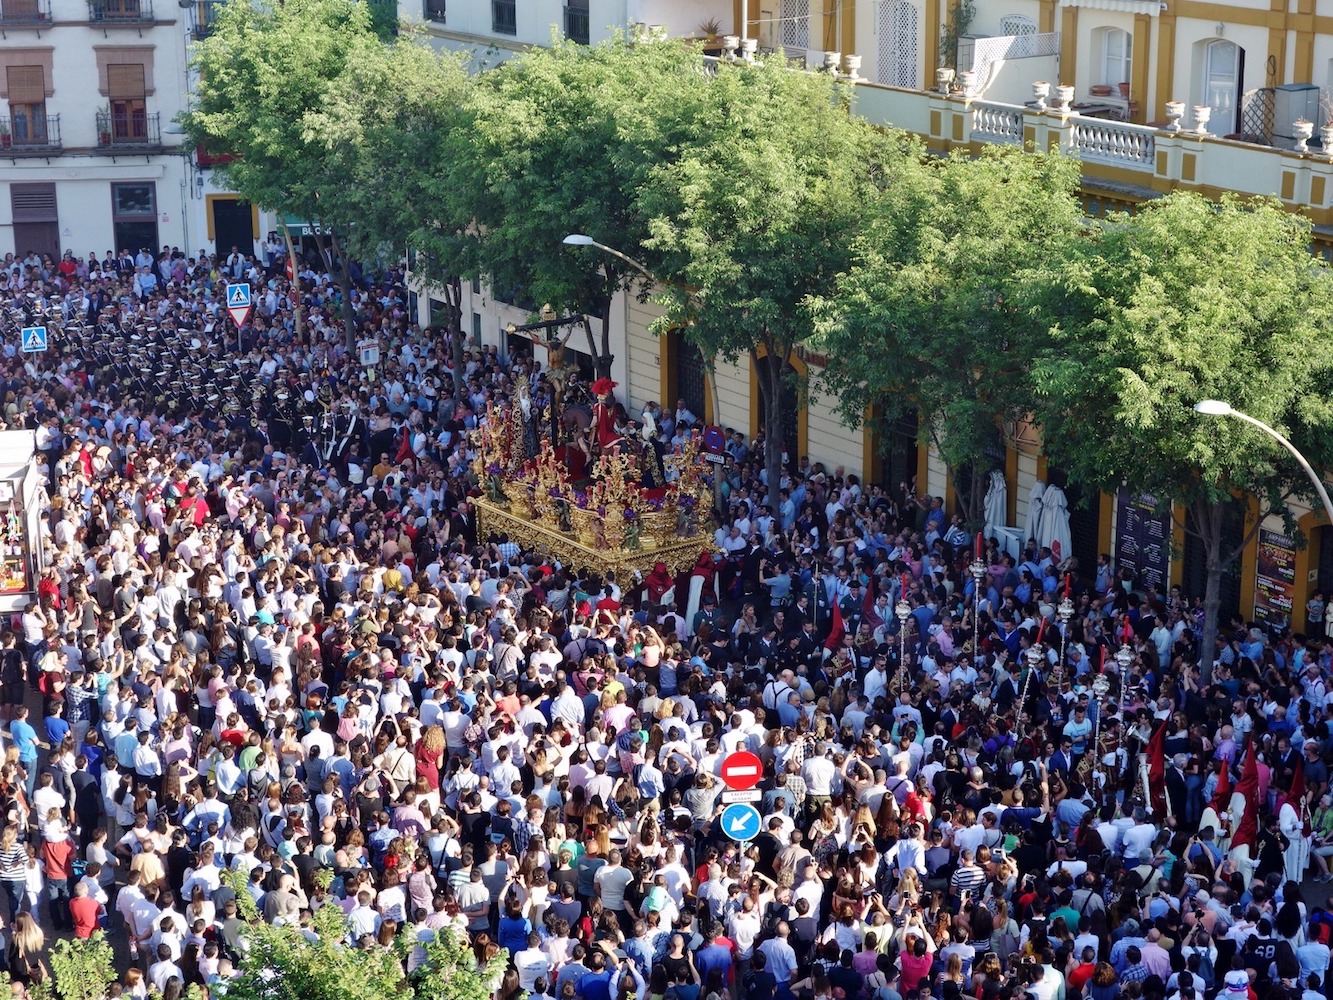 What You Need to Know About Semana Santa in Seville